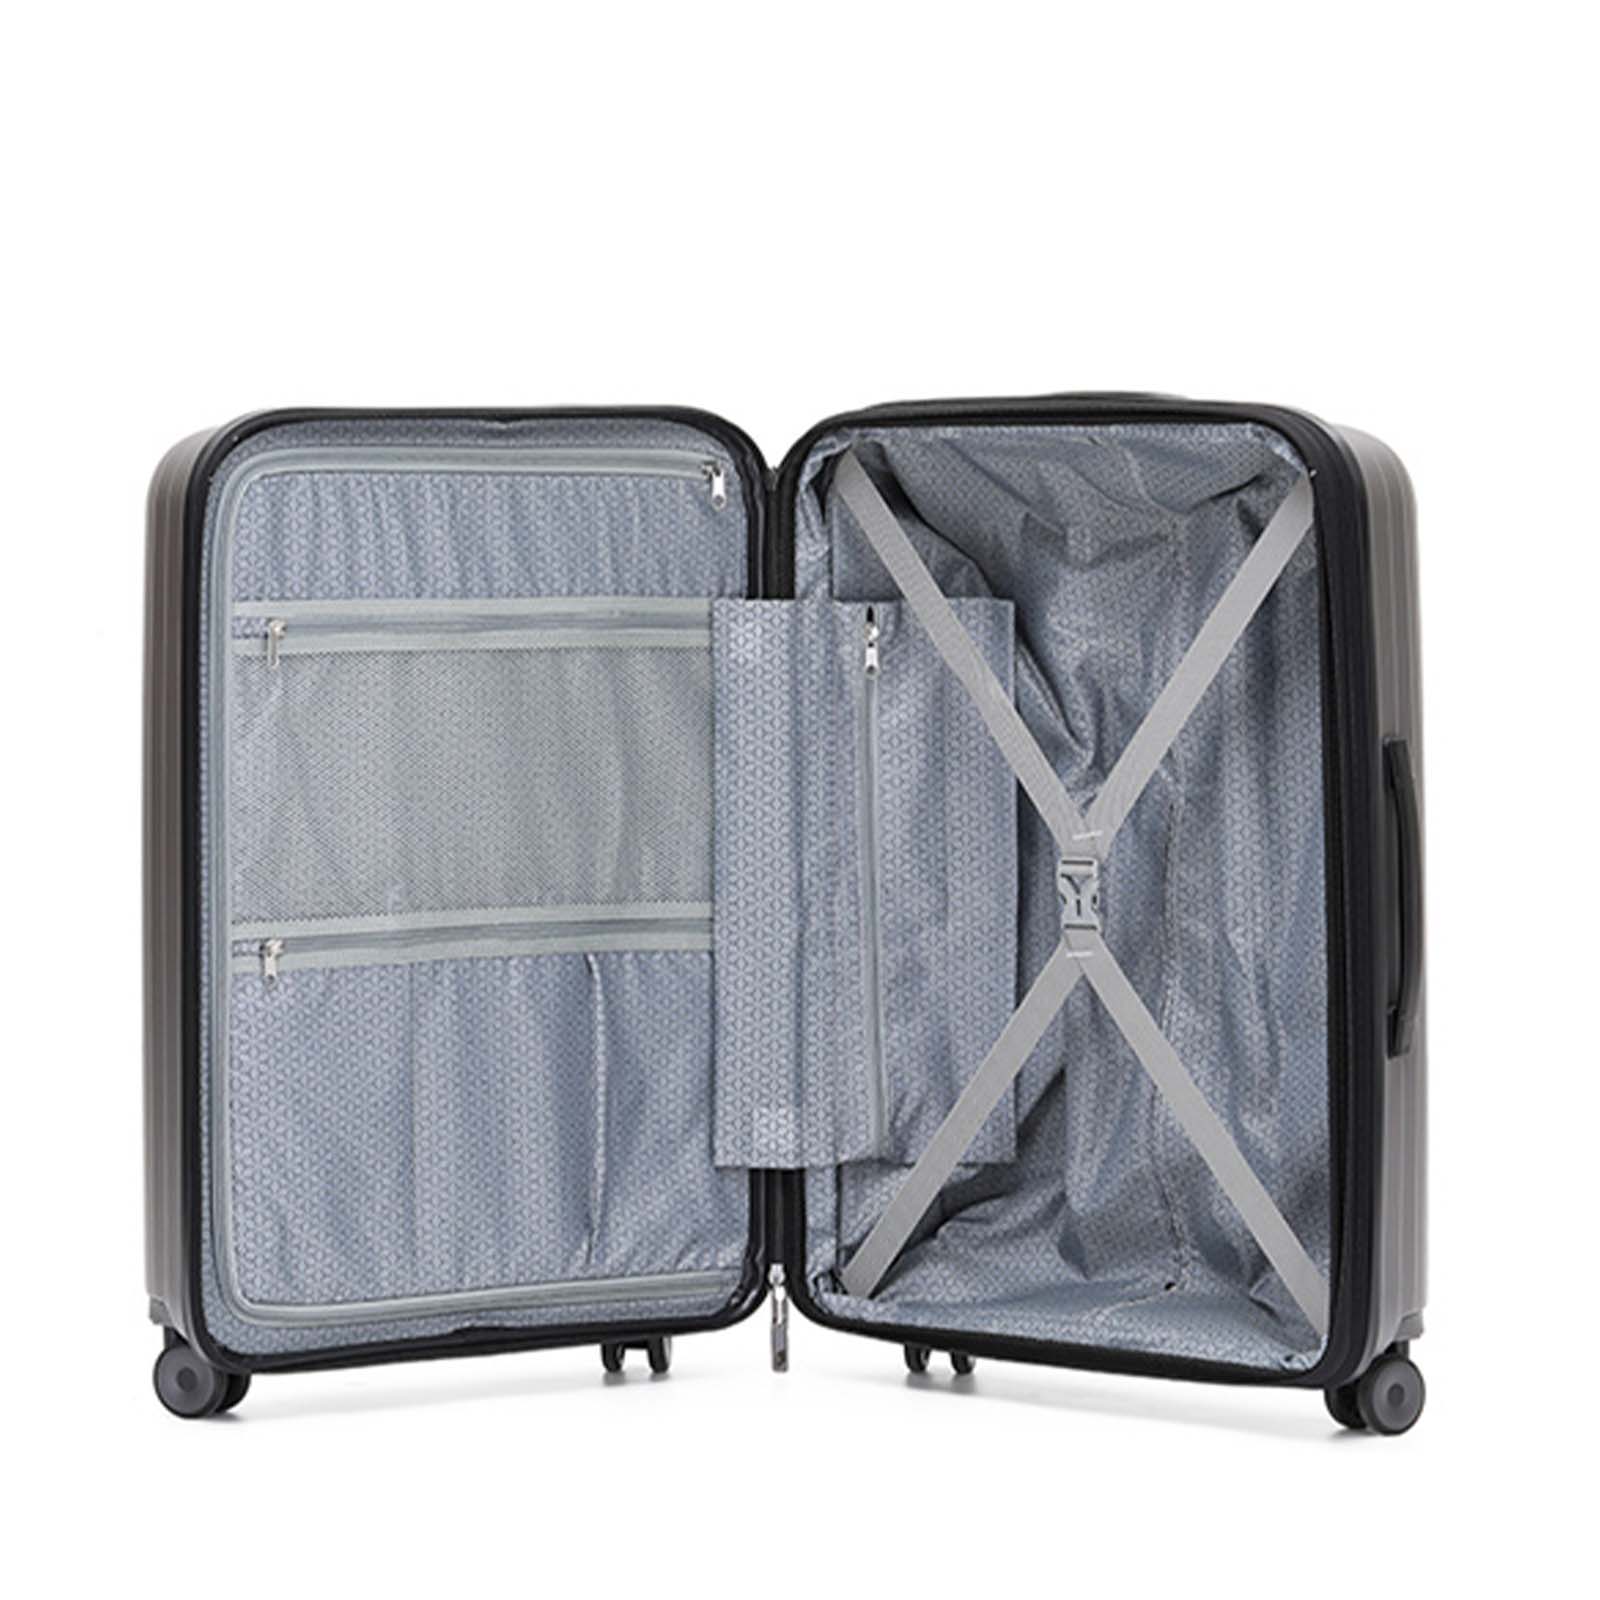    tosca-eclipse-4-wheel-77cm-large-suitcase-charcoal-open